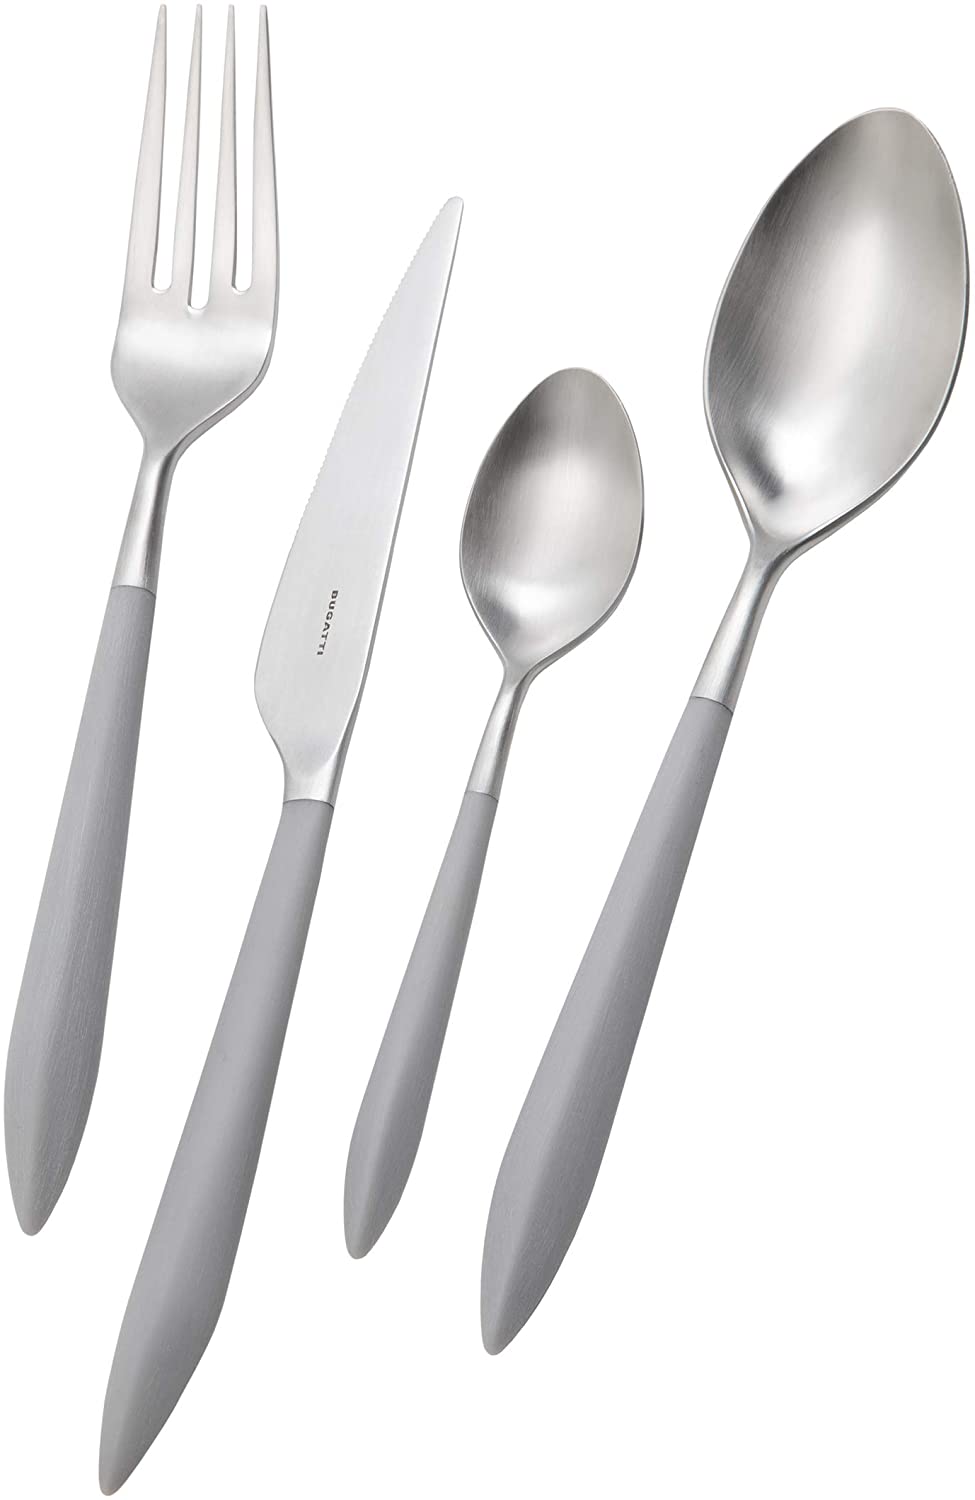 BUGATTI, Ares, 24-Piece Cutlery Set in 18/10 Stainless Steel.